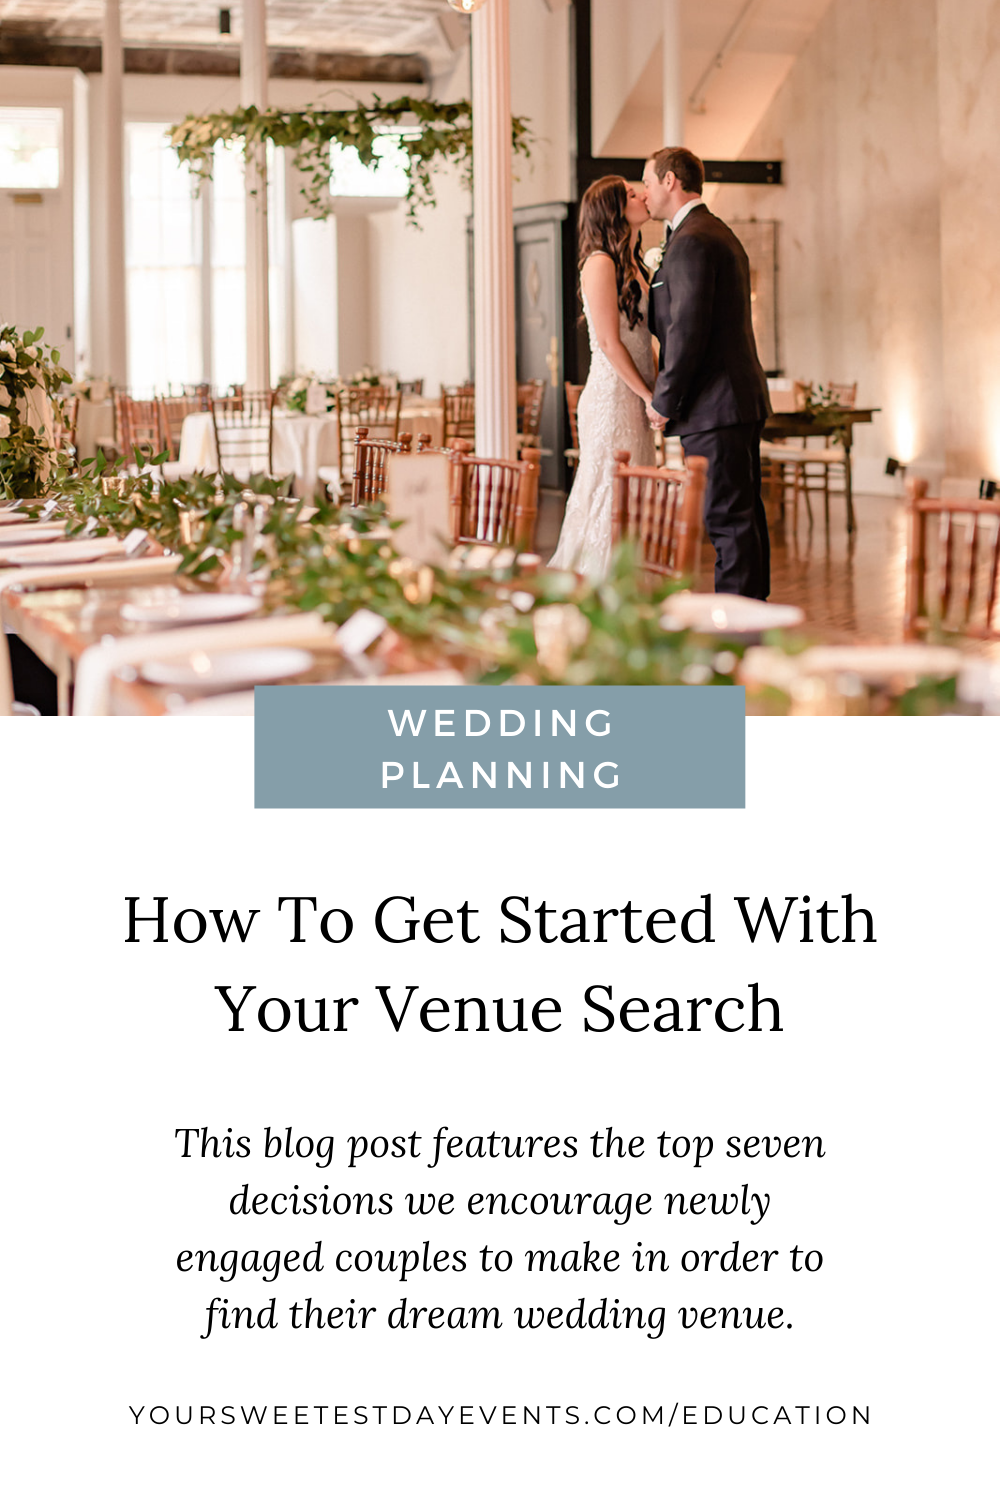 How To Get Started With Your Venue Search // Your Sweetest Day Events (#weddingplanning, #weddingresearch, #howtofindyourvenue, #weddingvenue #weddingvenueresearch )